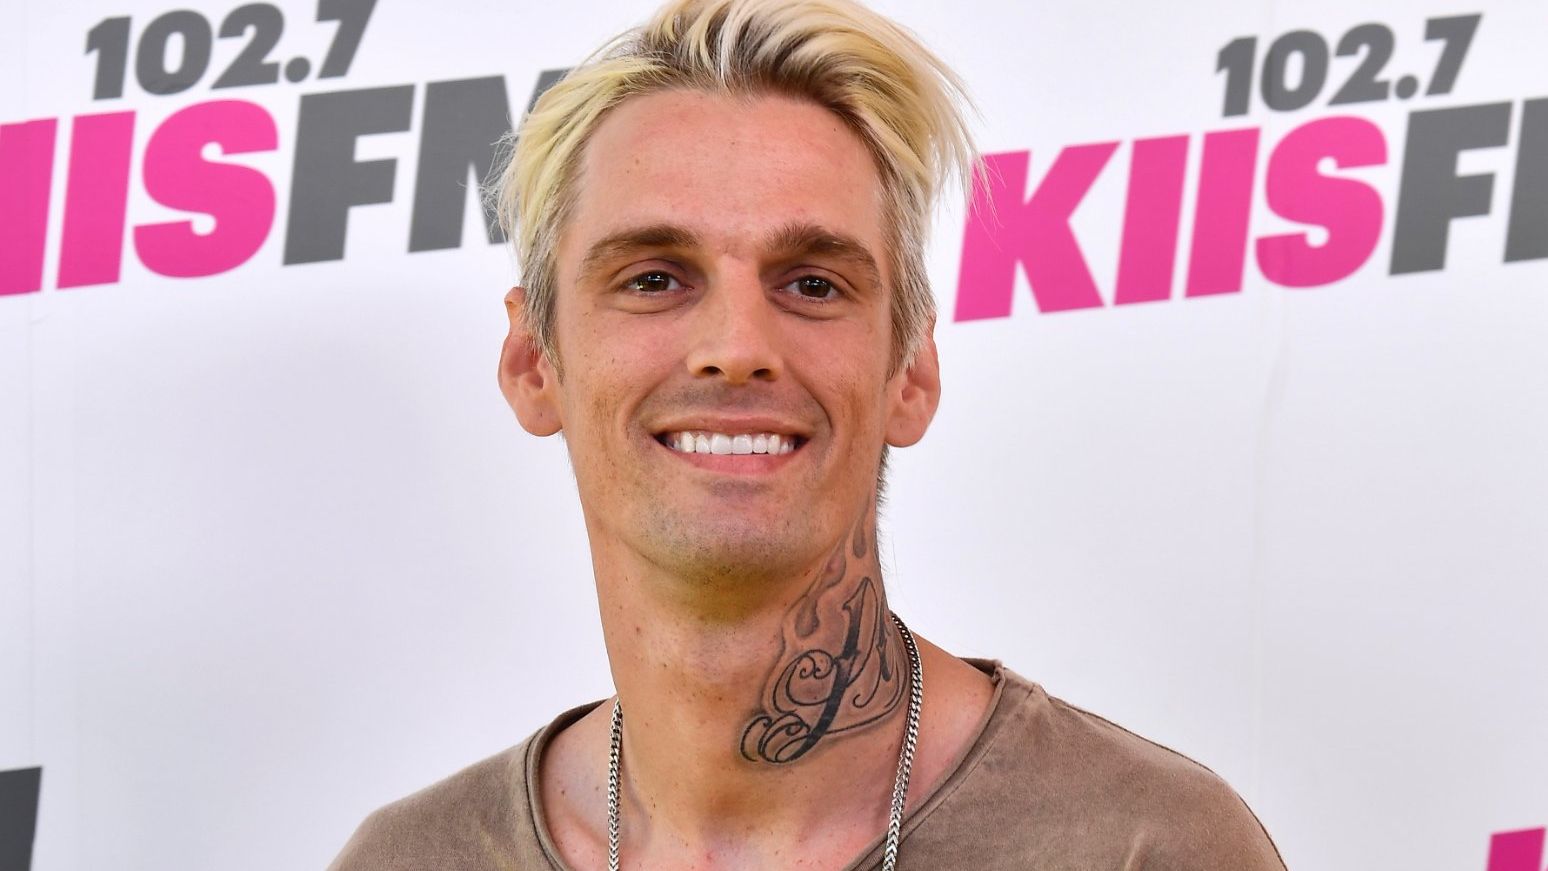 Aaron Carter denies he was under the influence when he was arrested by Georgia police. 